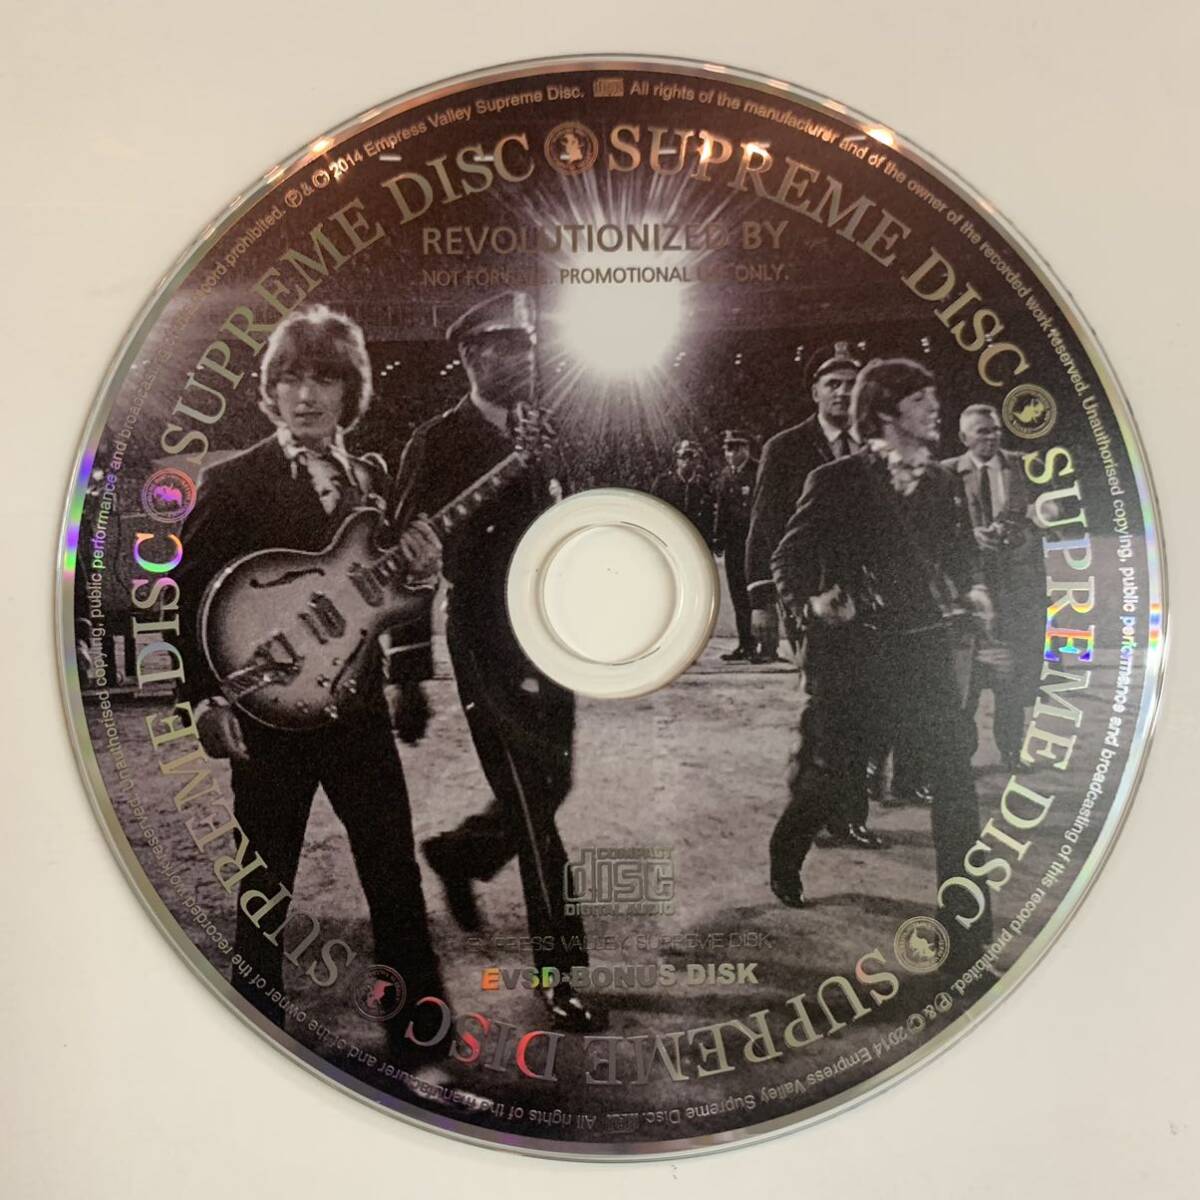 THE BEATLES / THE LAST CONCERT - Recorded live at Candlestick Park 29th August 1966 激レア・アイテム！Pro use Only！